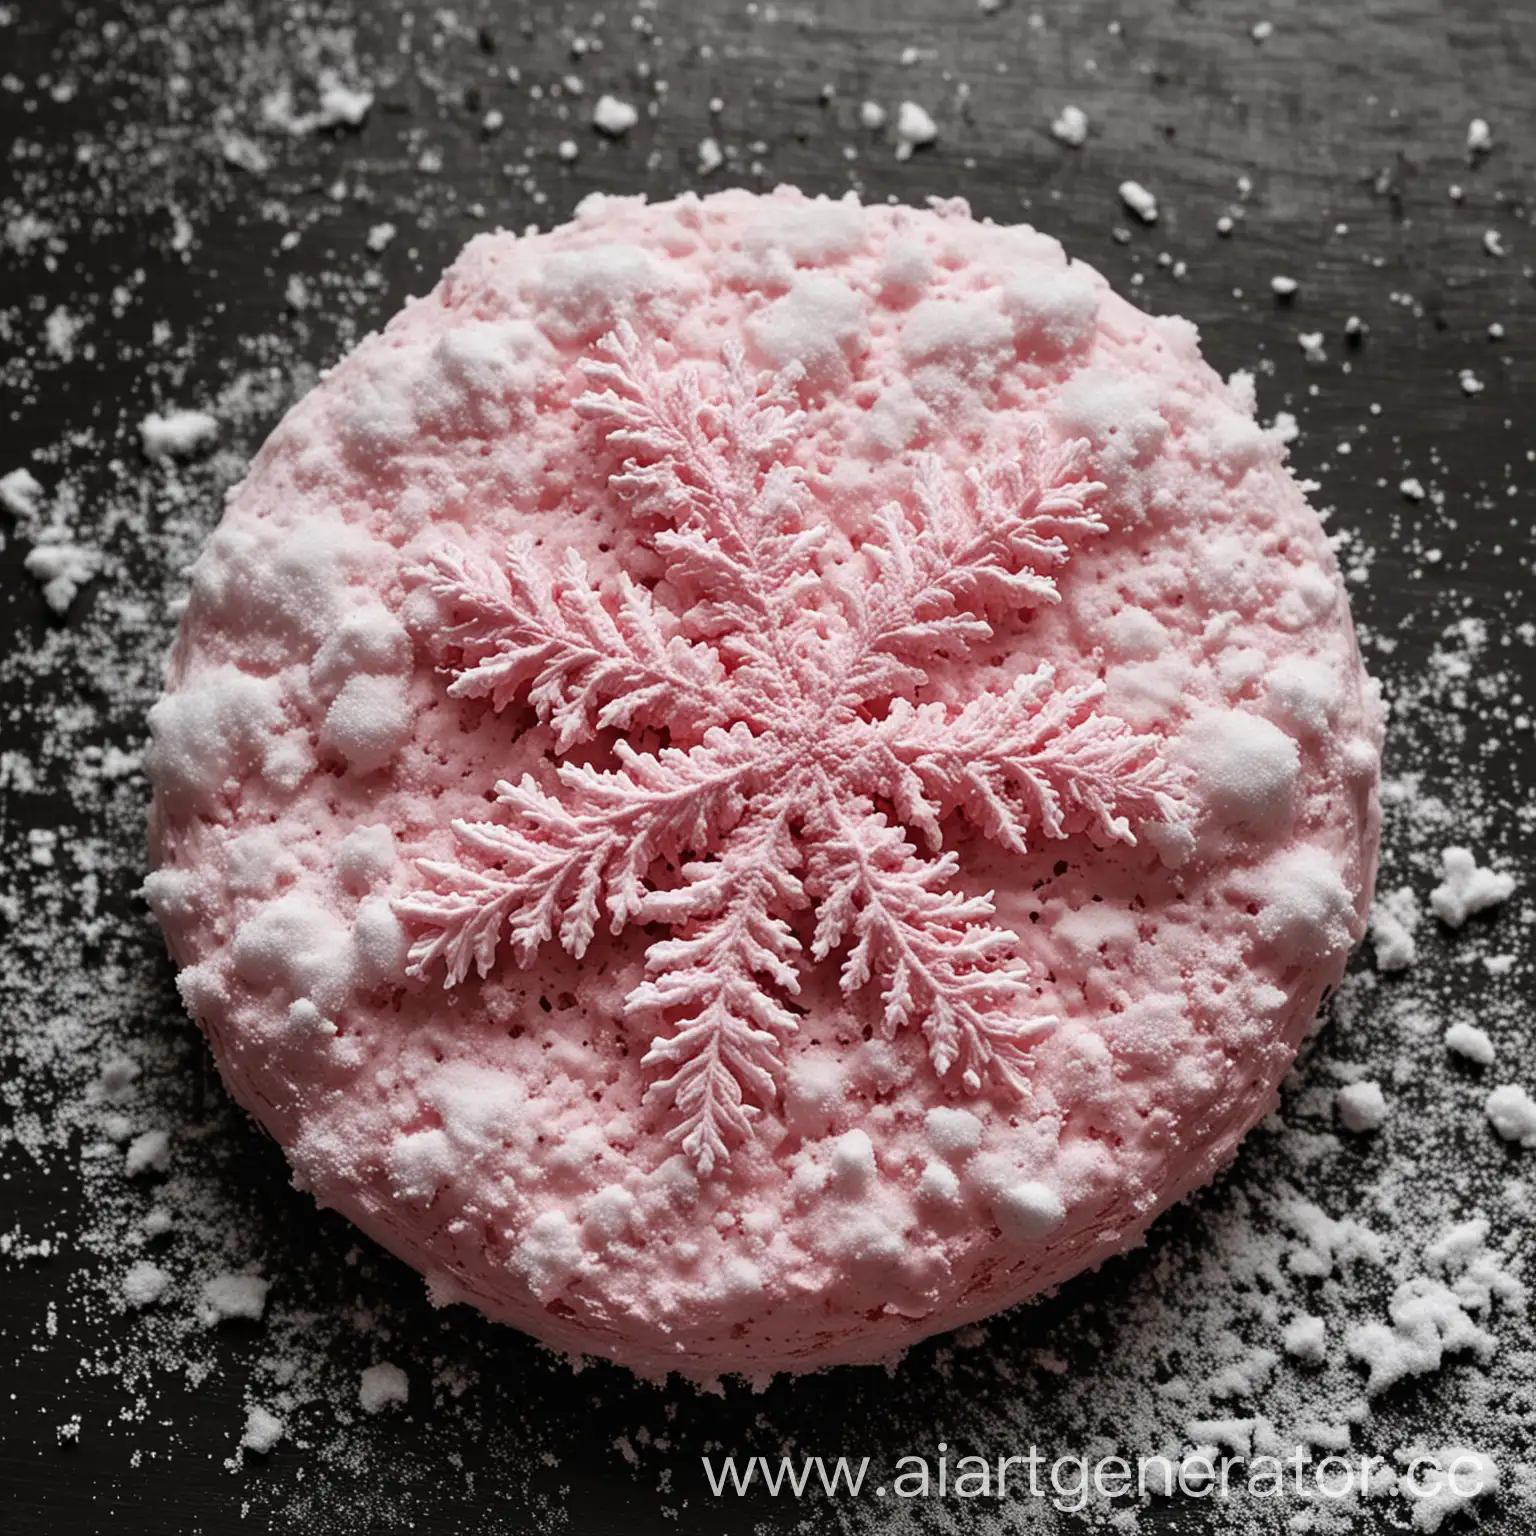 Pink-Snowy-Mold-Vibrant-Fungi-Blossoming-in-a-Winter-Wonderland